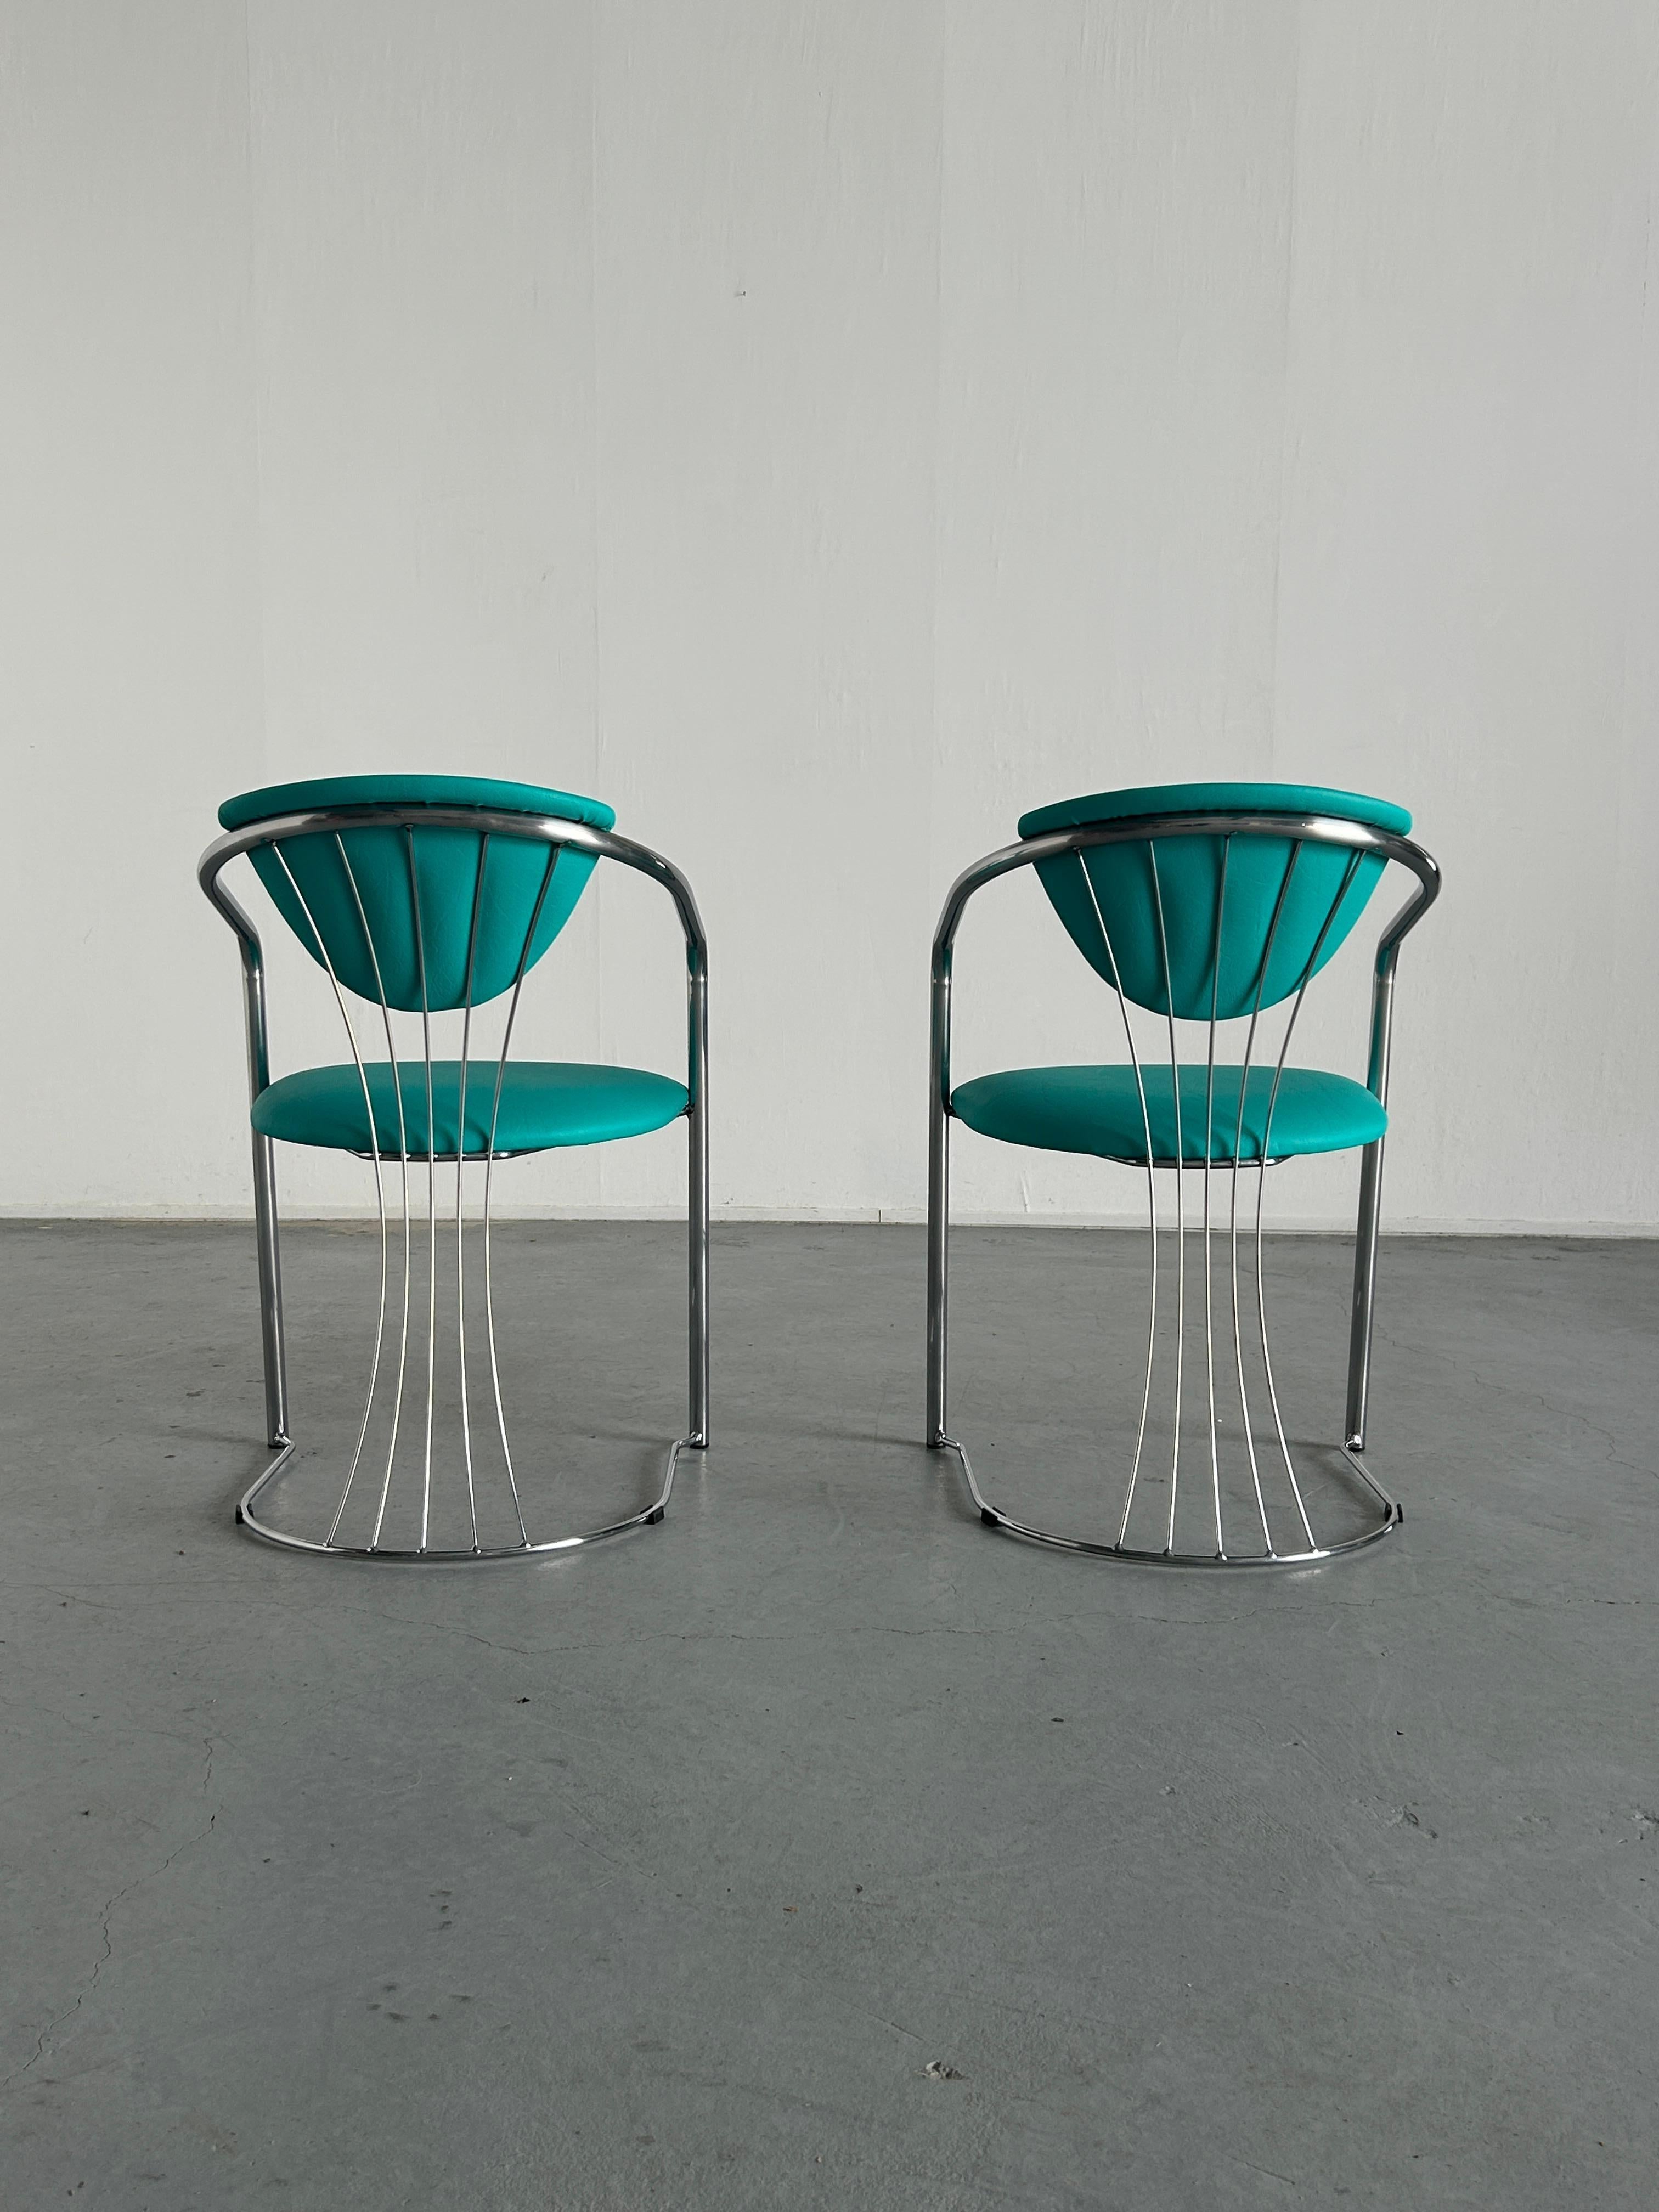 1 of 2 Vintage Steel and Mint Green Faux Leather Dining Chairs by Effezeta, 90s For Sale 2